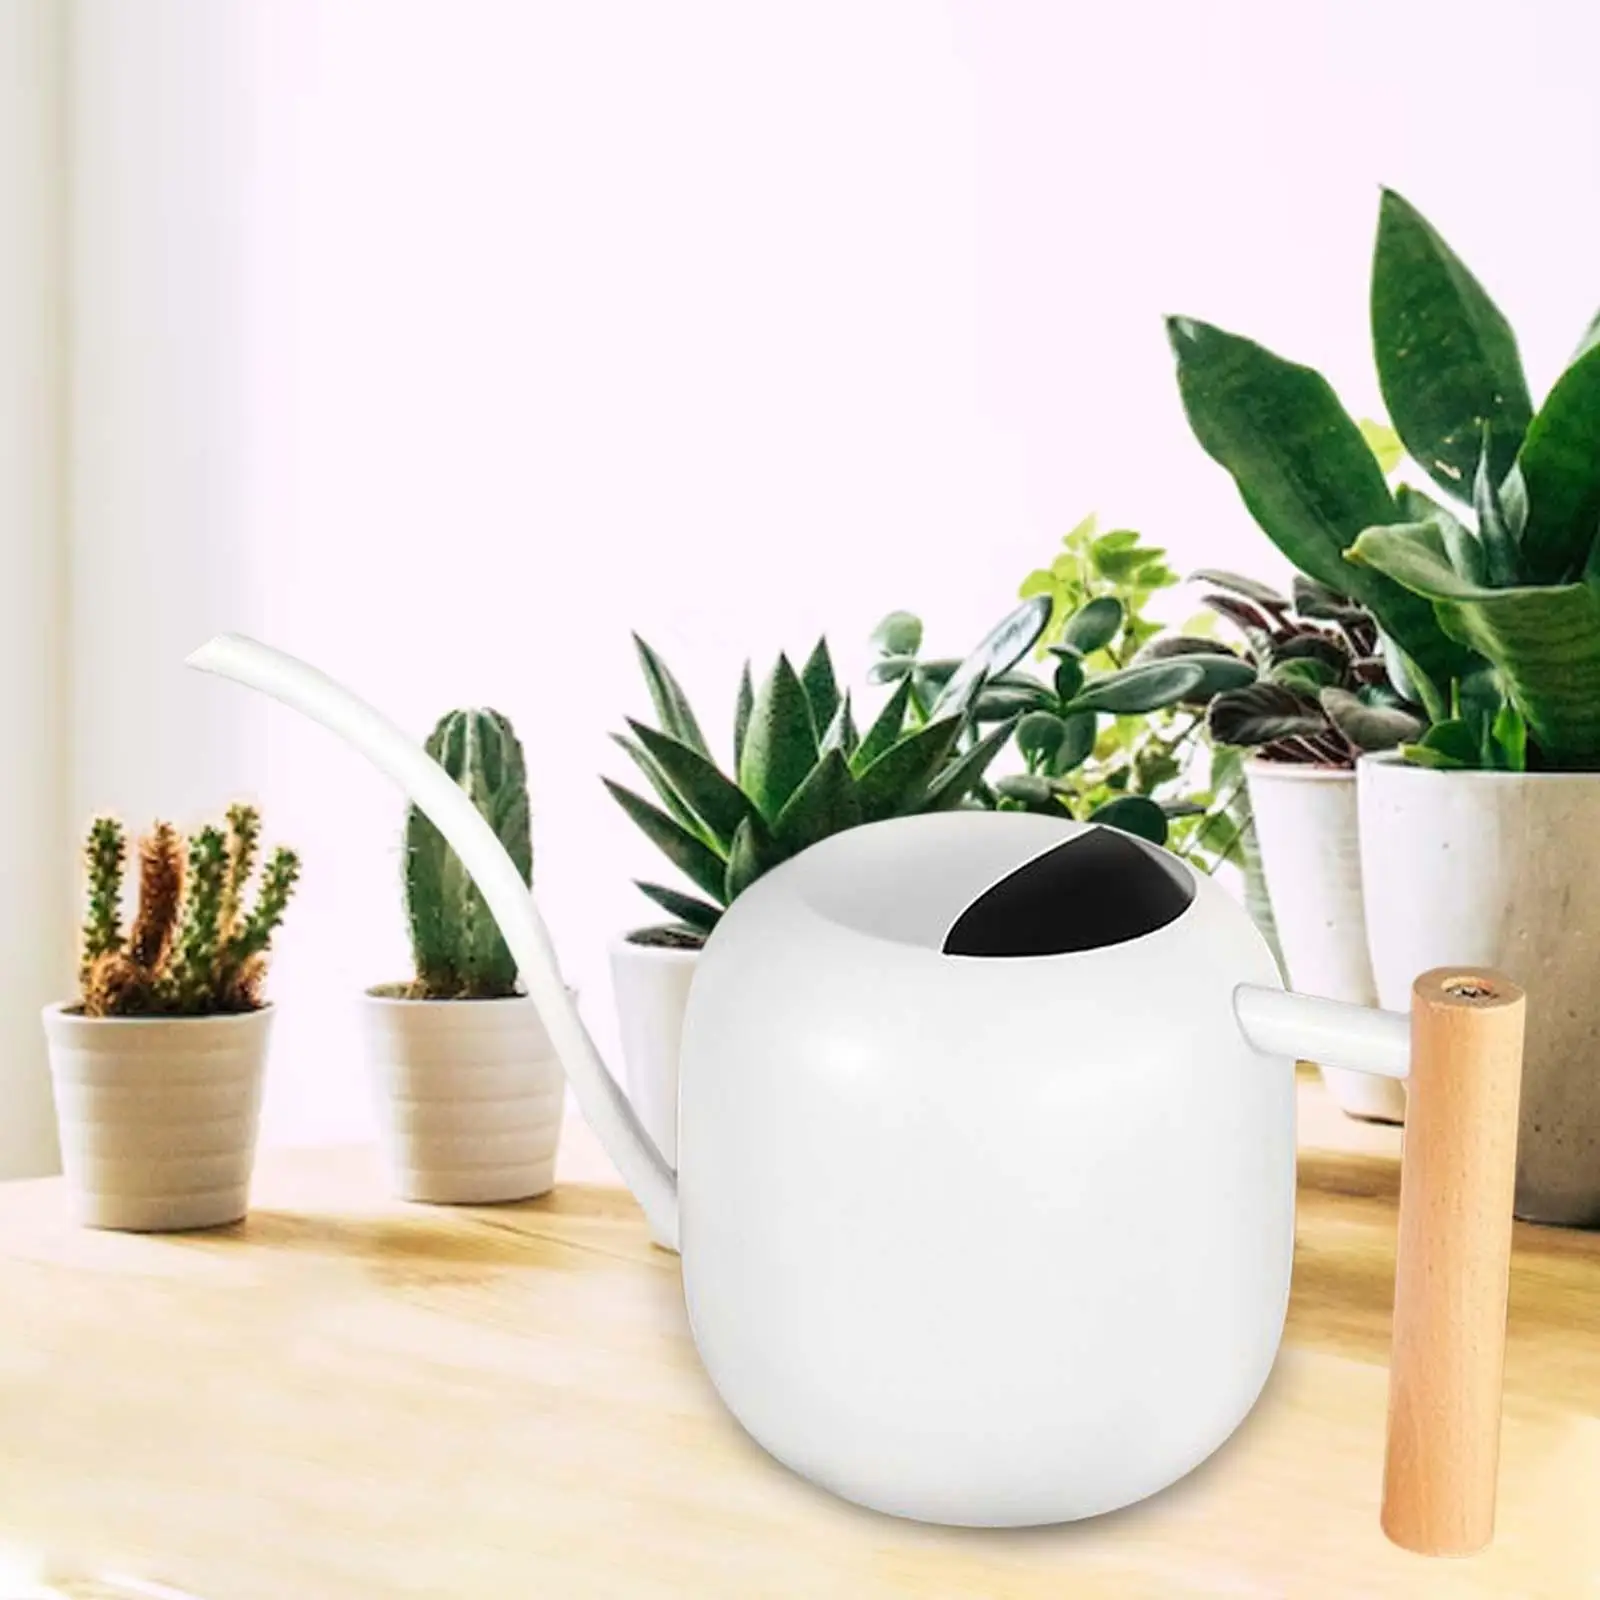 Stainless Steel Mini Watering Can with Long Mouth Watering Flower Kettle 1.2L Watering Pot for Home Shower Yard Outdoor Decor